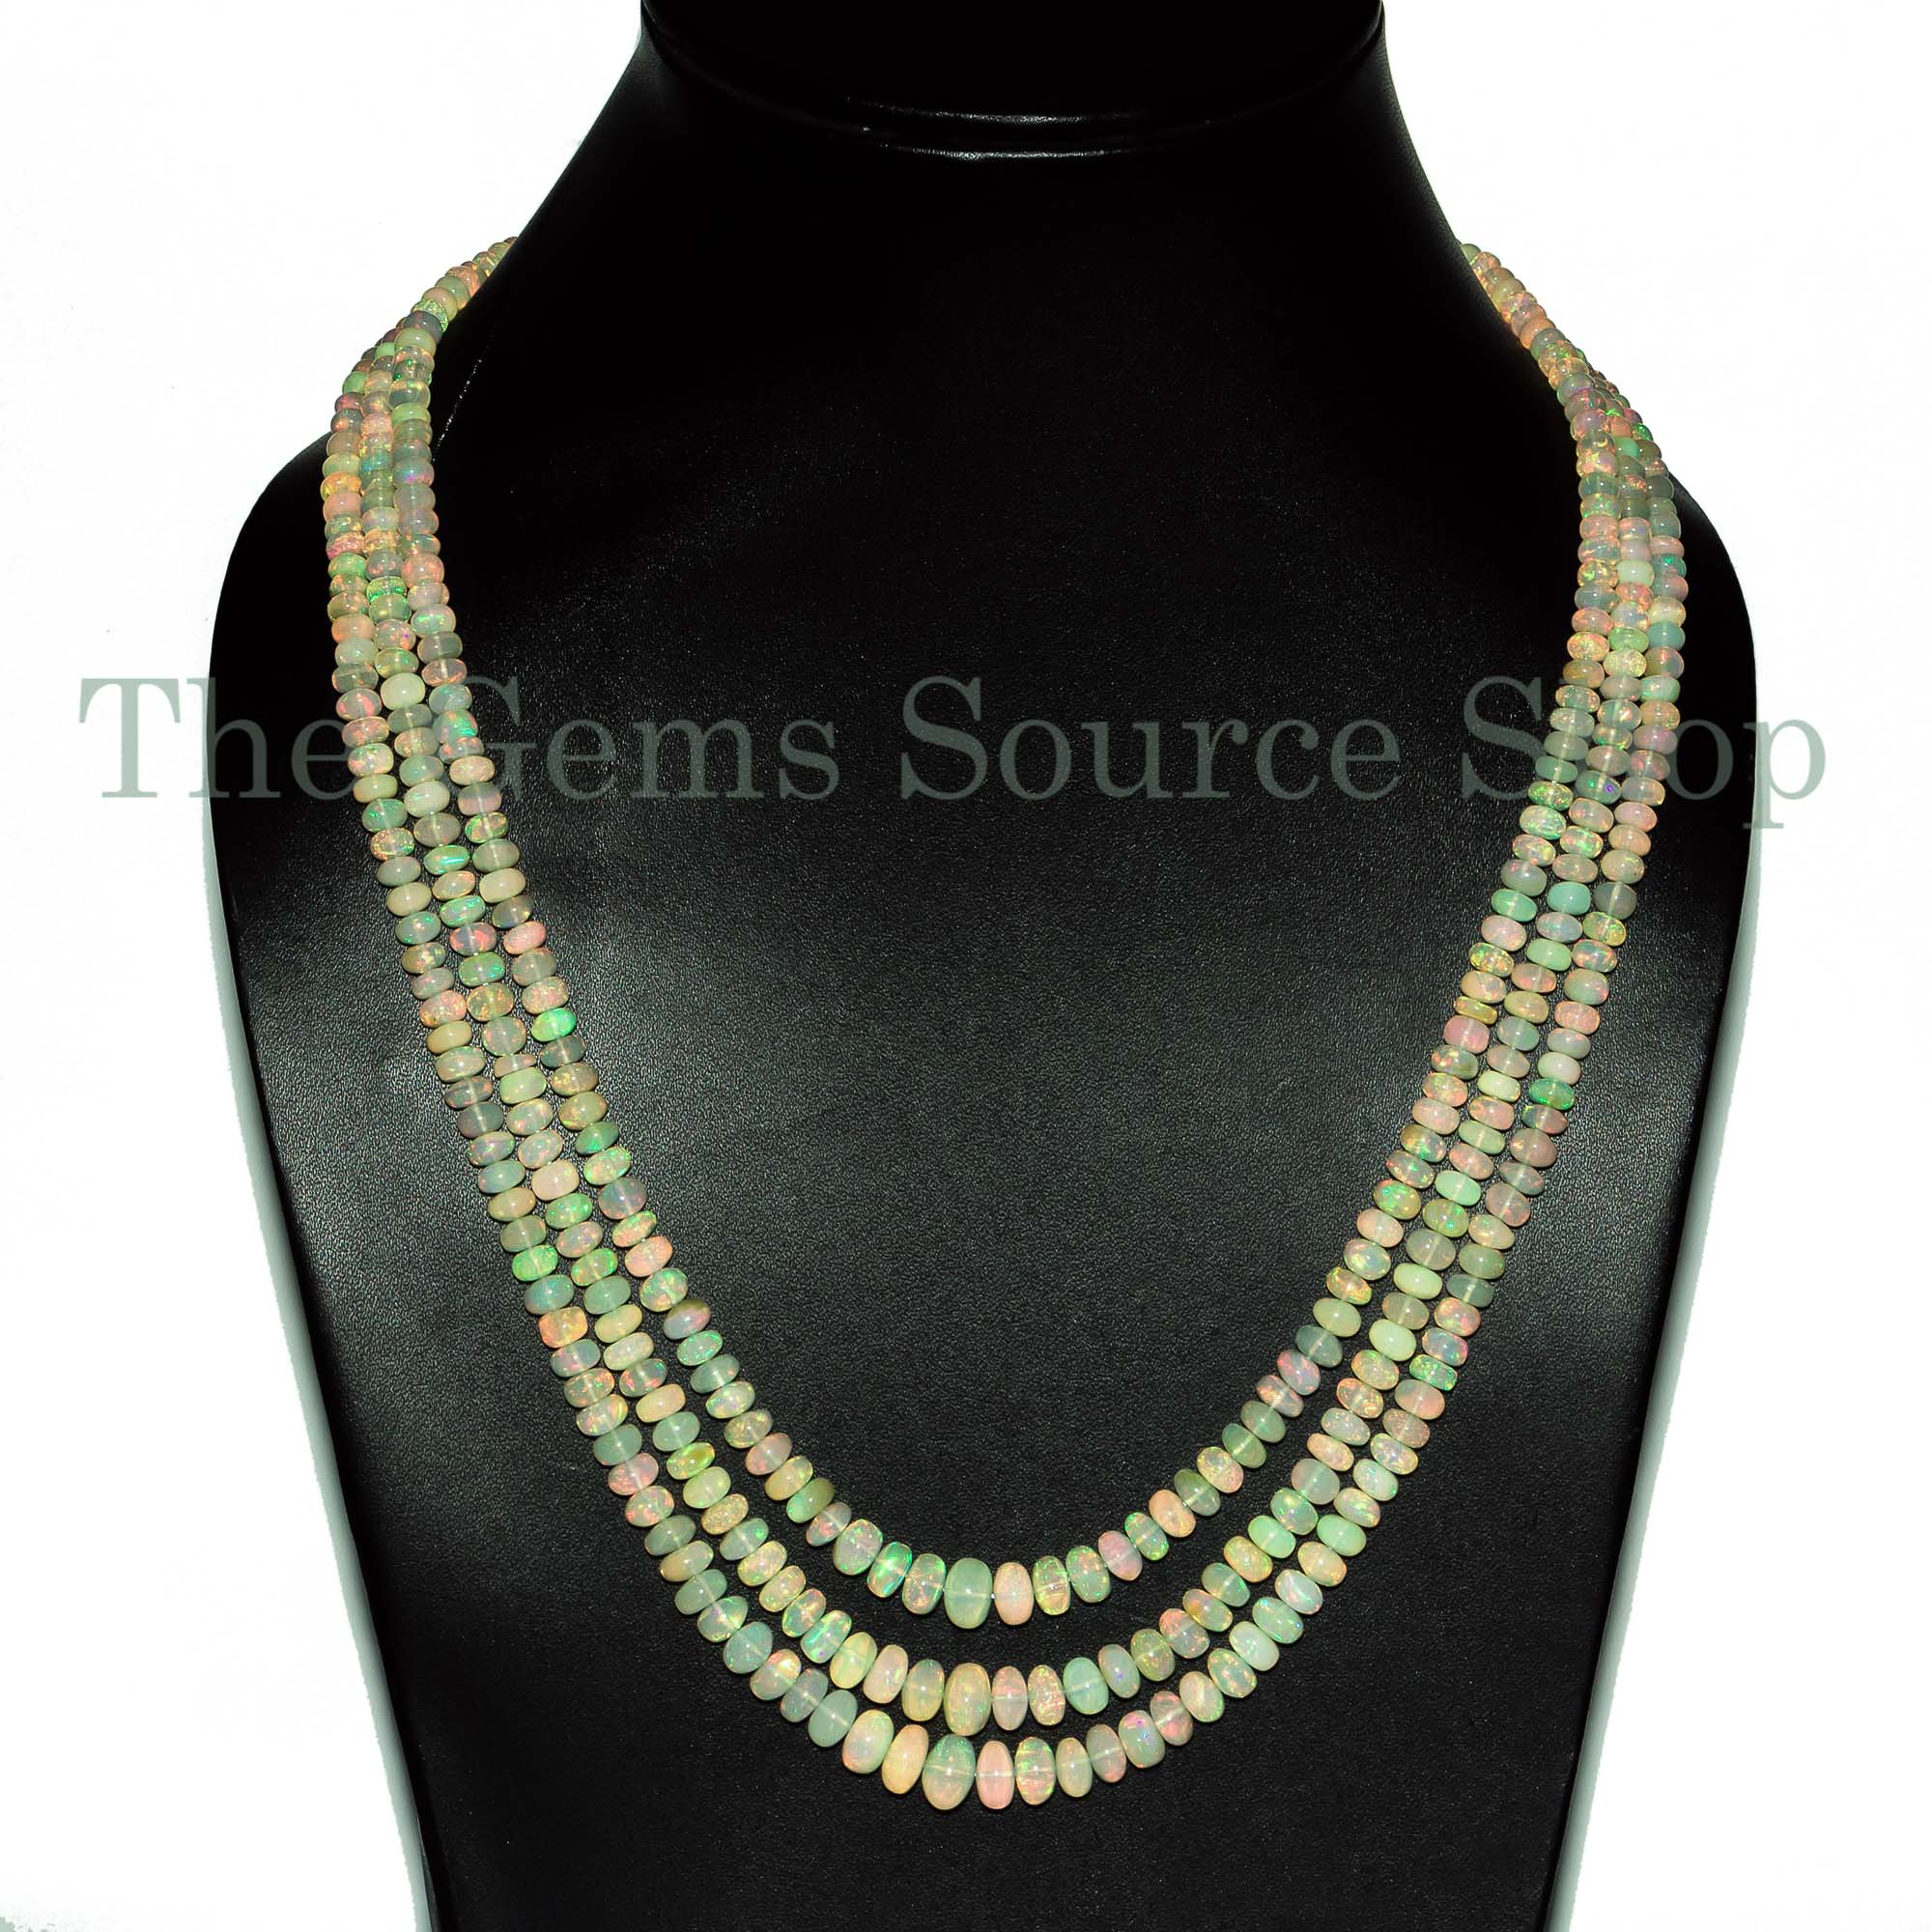 4.5-8 mm Natural Ethiopian Opal Necklace, Top Quality Ethiopian Opal Gemstone, Opal Beaded Necklace, Rondelle Necklace, Opal Necklace Beads